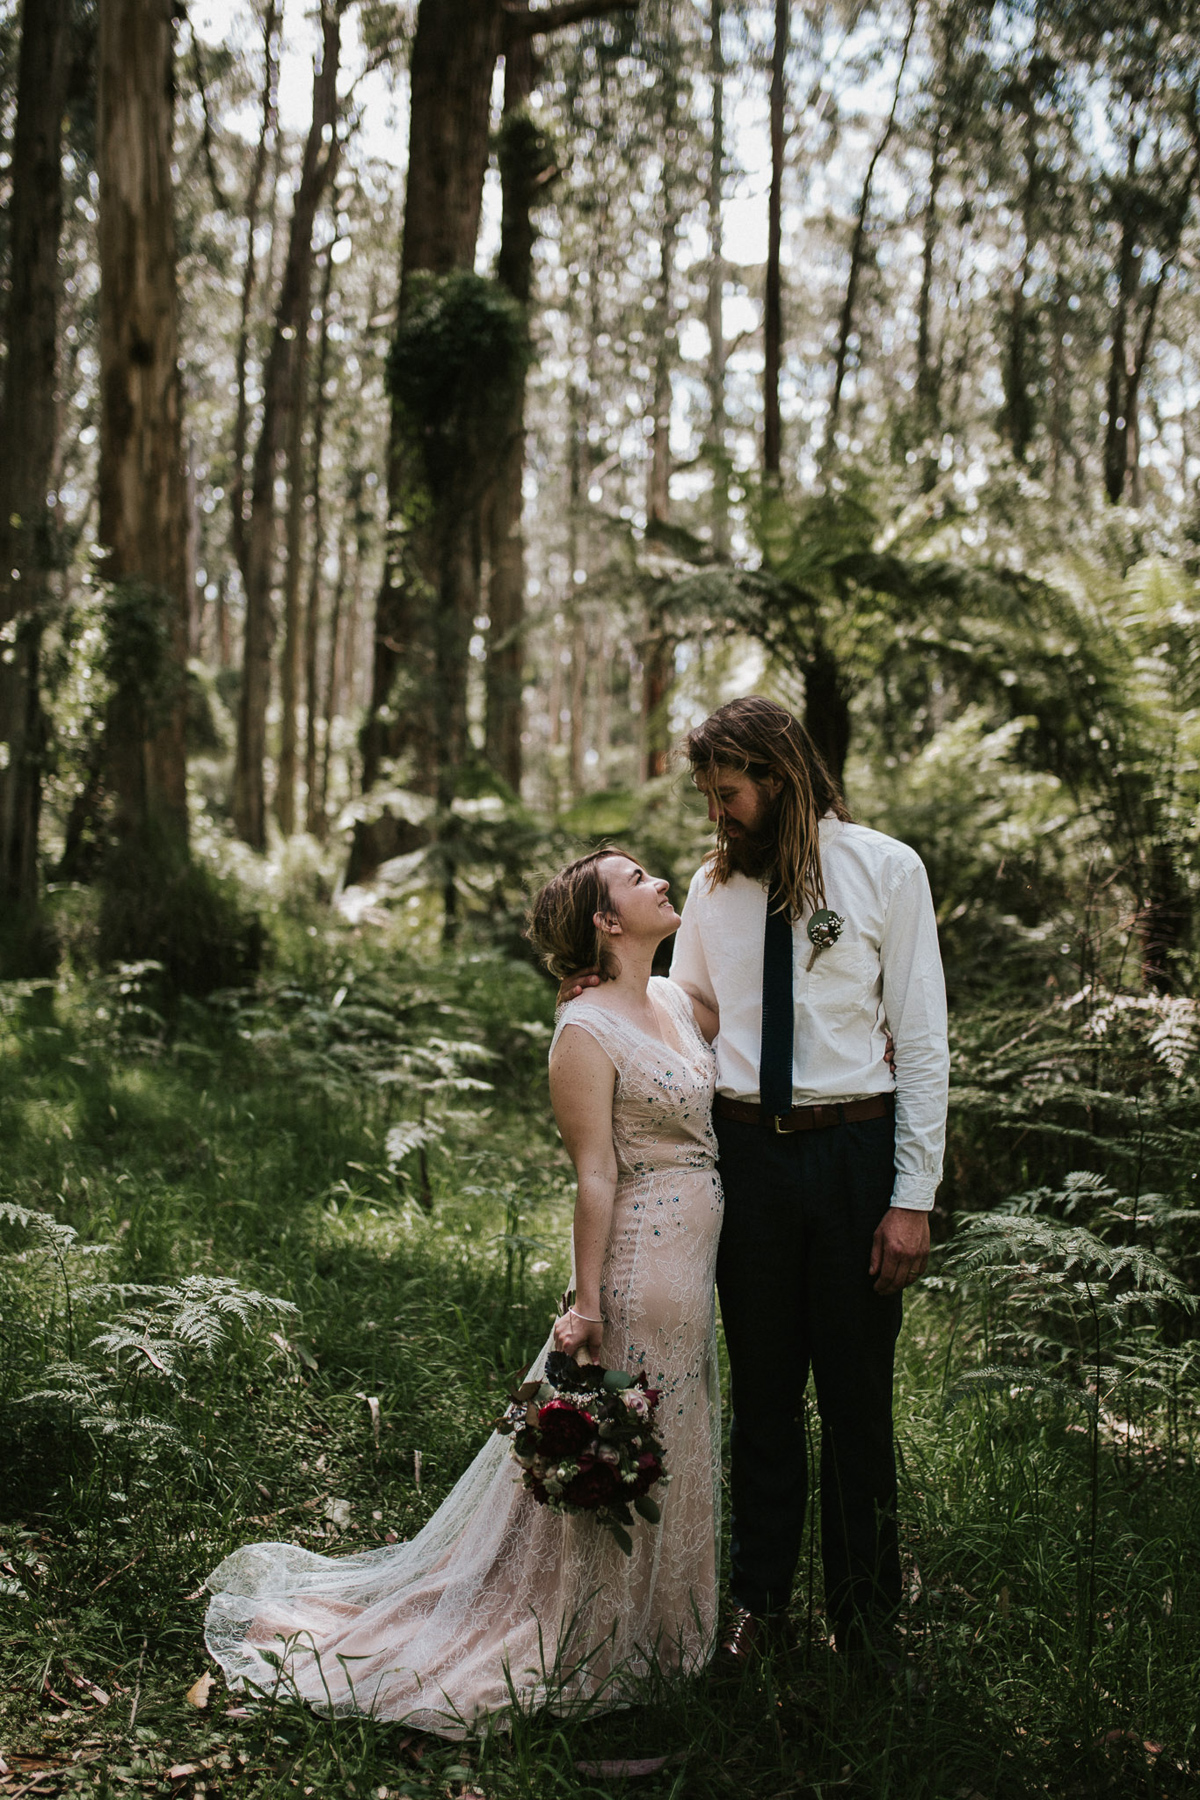 Berenice&Sam_Melbourne-Dandenongs-Elopement_Relaxed-Quirky-Candid-Wedding-Photography_59